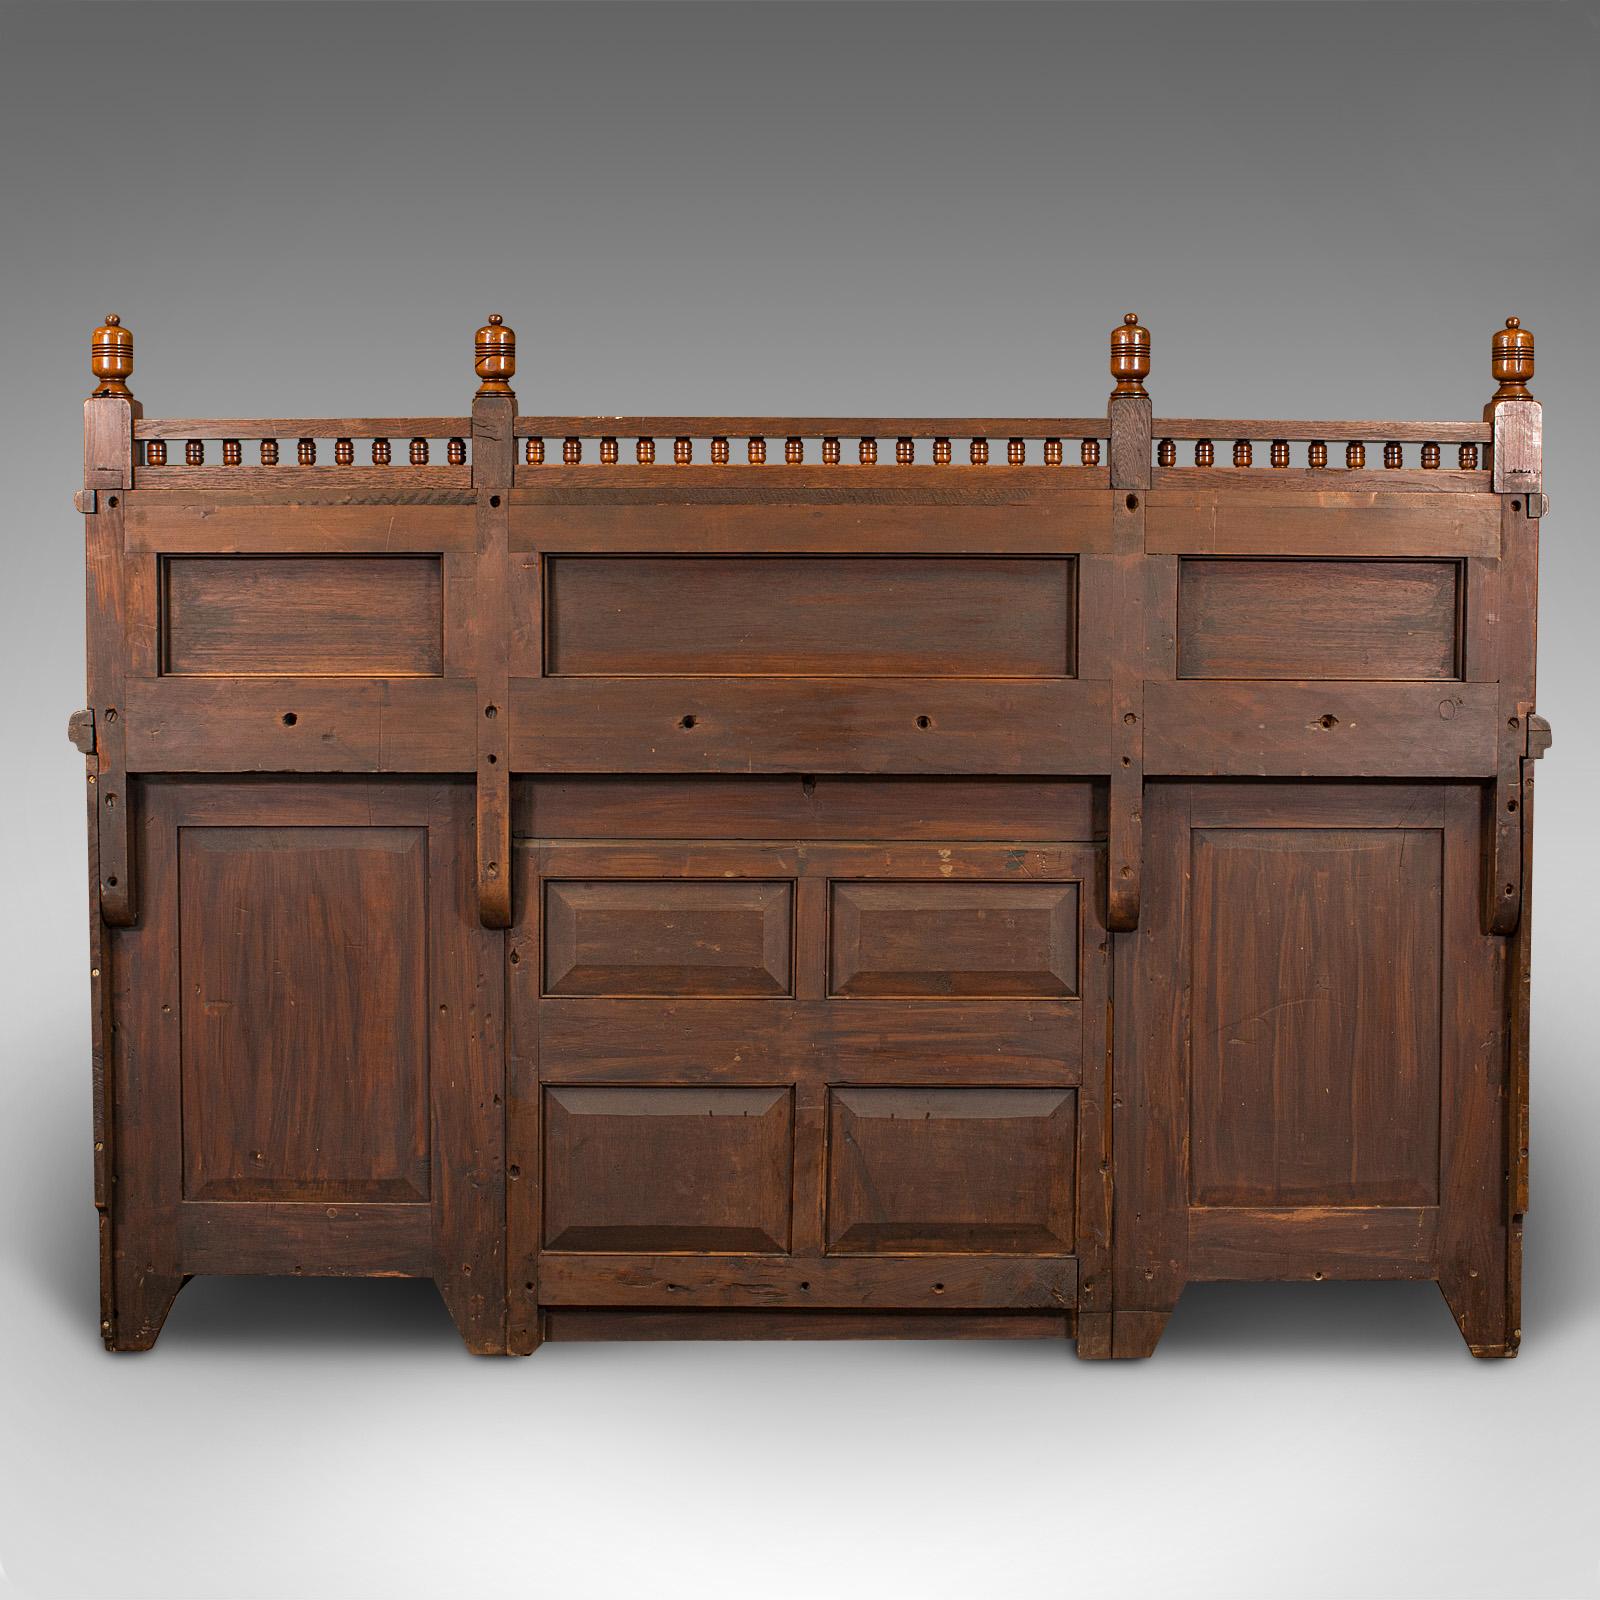 Large Antique Grand Sideboard, Scottish, Oak, Buffet Cabinet, Victorian, C.1860 In Good Condition For Sale In Hele, Devon, GB